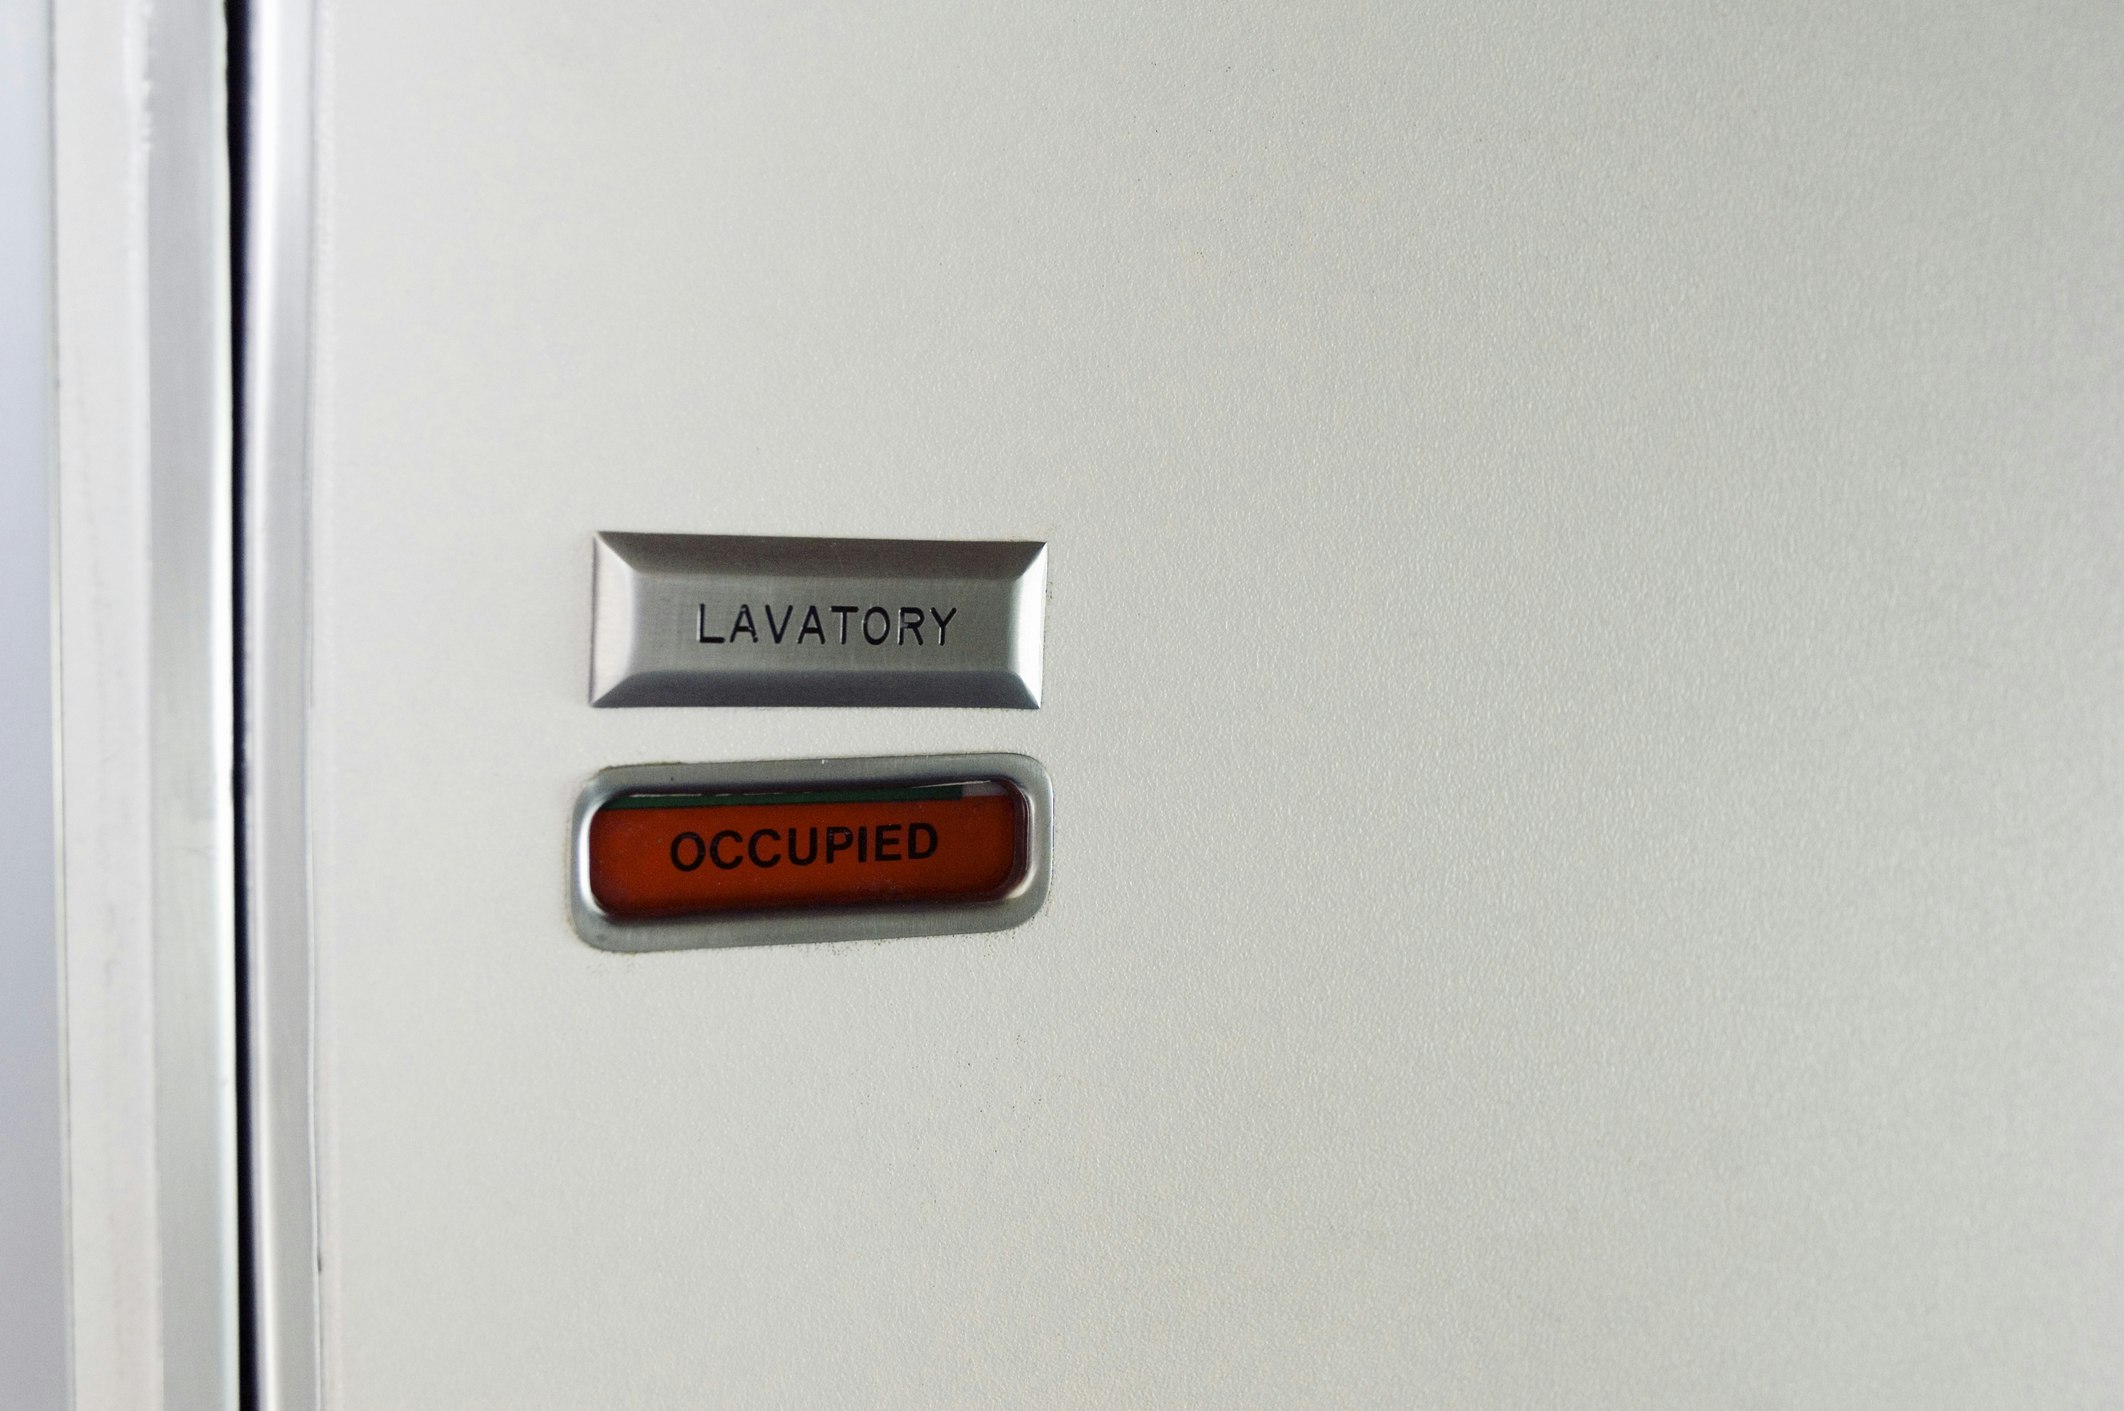 the occuped sign of an airplane toilet.  